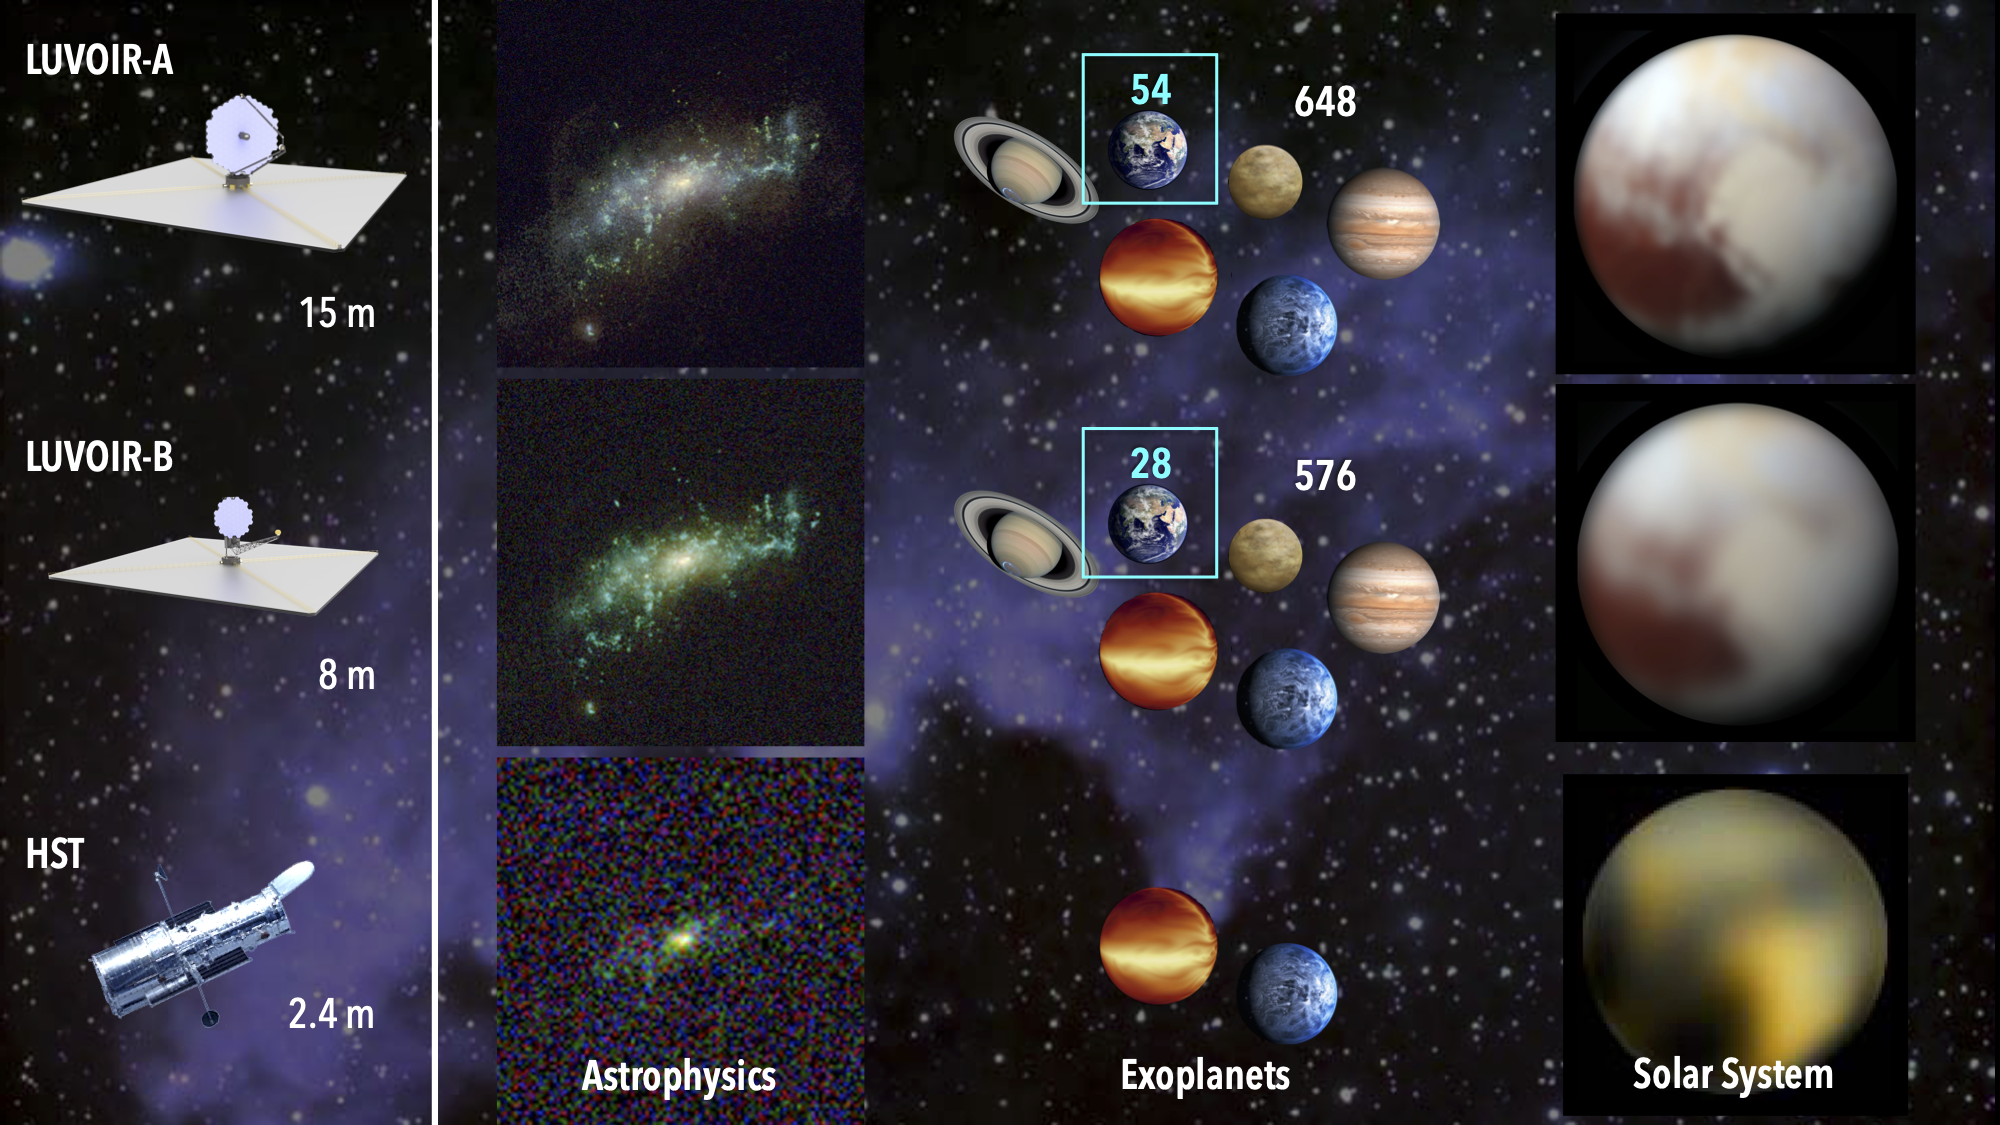 LUVOIR's science capabilities compared to the Hubble Space Telescope's.